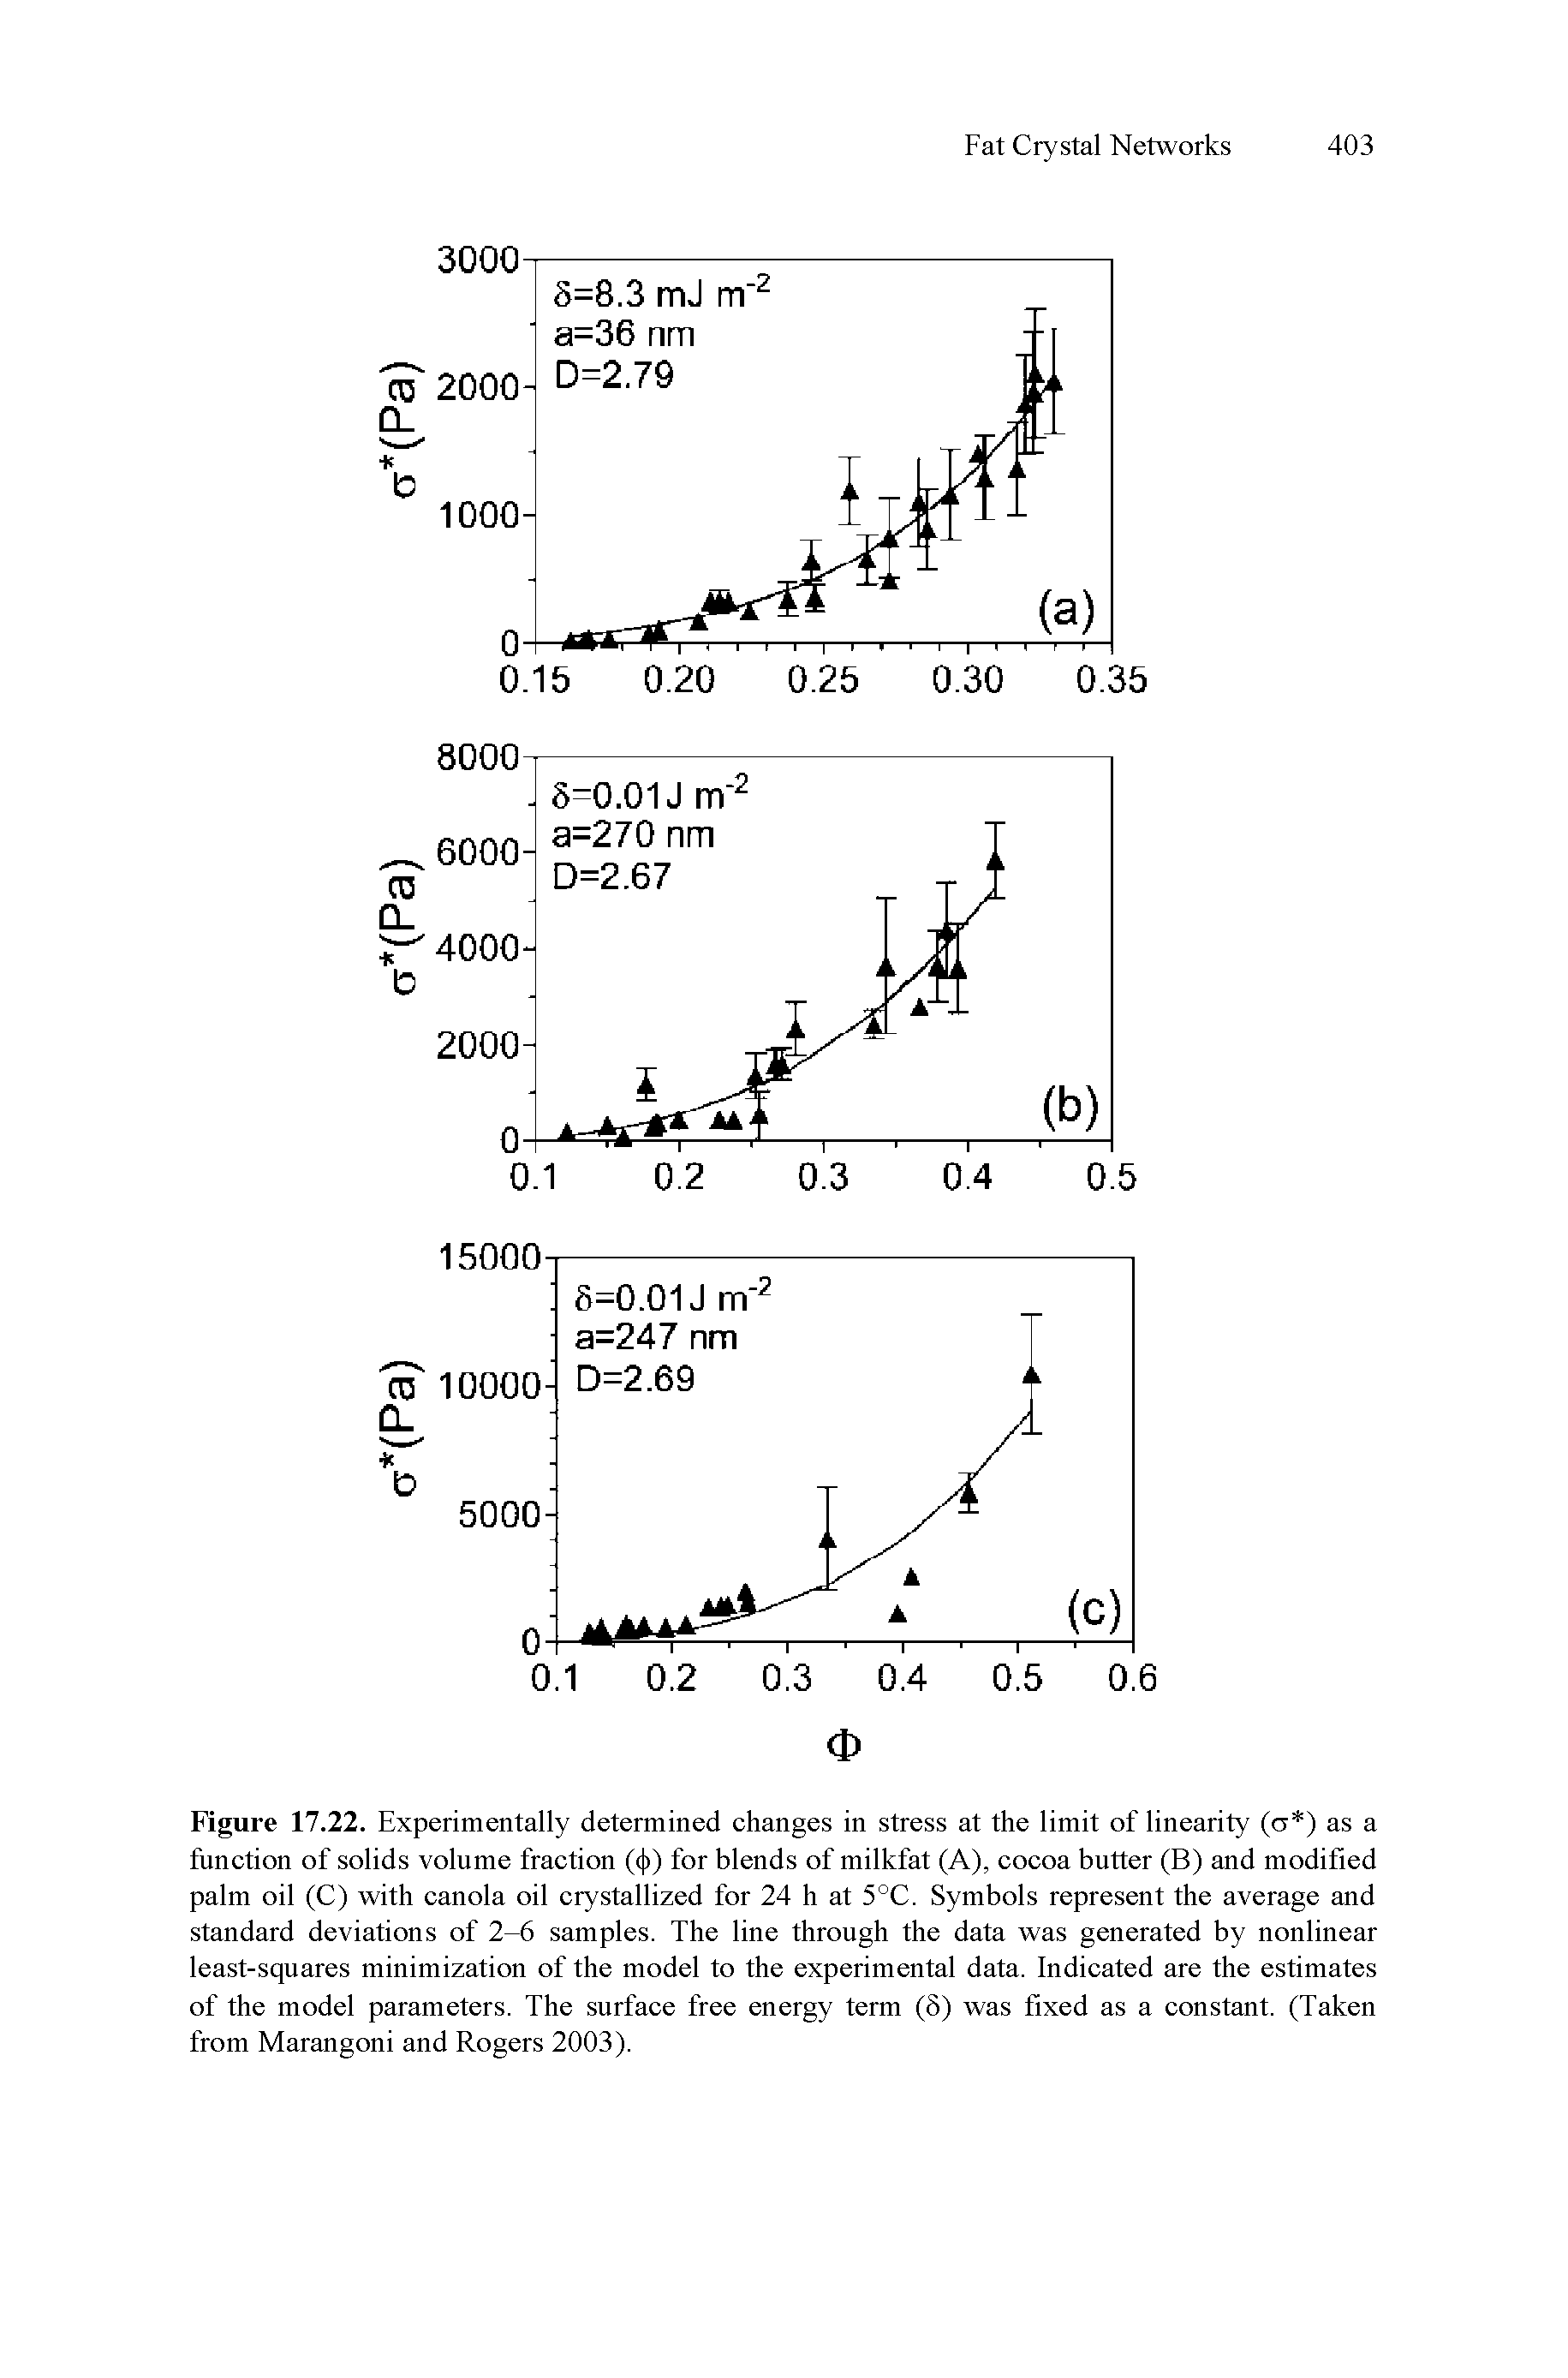 Figure 17.22. Experimentally determined ehanges in stress at the limit of linearity (cr ) as a funetion of solids volume fraetion (( )) for blends of milkfat (A), eoeoa butter (B) and modified palm oil (C) with eanola oil erystallized for 24 h at 5°C. Symbols represent the average and standard deviations of 2-6 samples. The line through the data was generated by nonlinear least-squares minimization of the model to the experimental data. Indieated are the estimates of the model parameters. The surfaee free energy term (8) was fixed as a eonstant. (Taken from Marangoni and Rogers 2003).